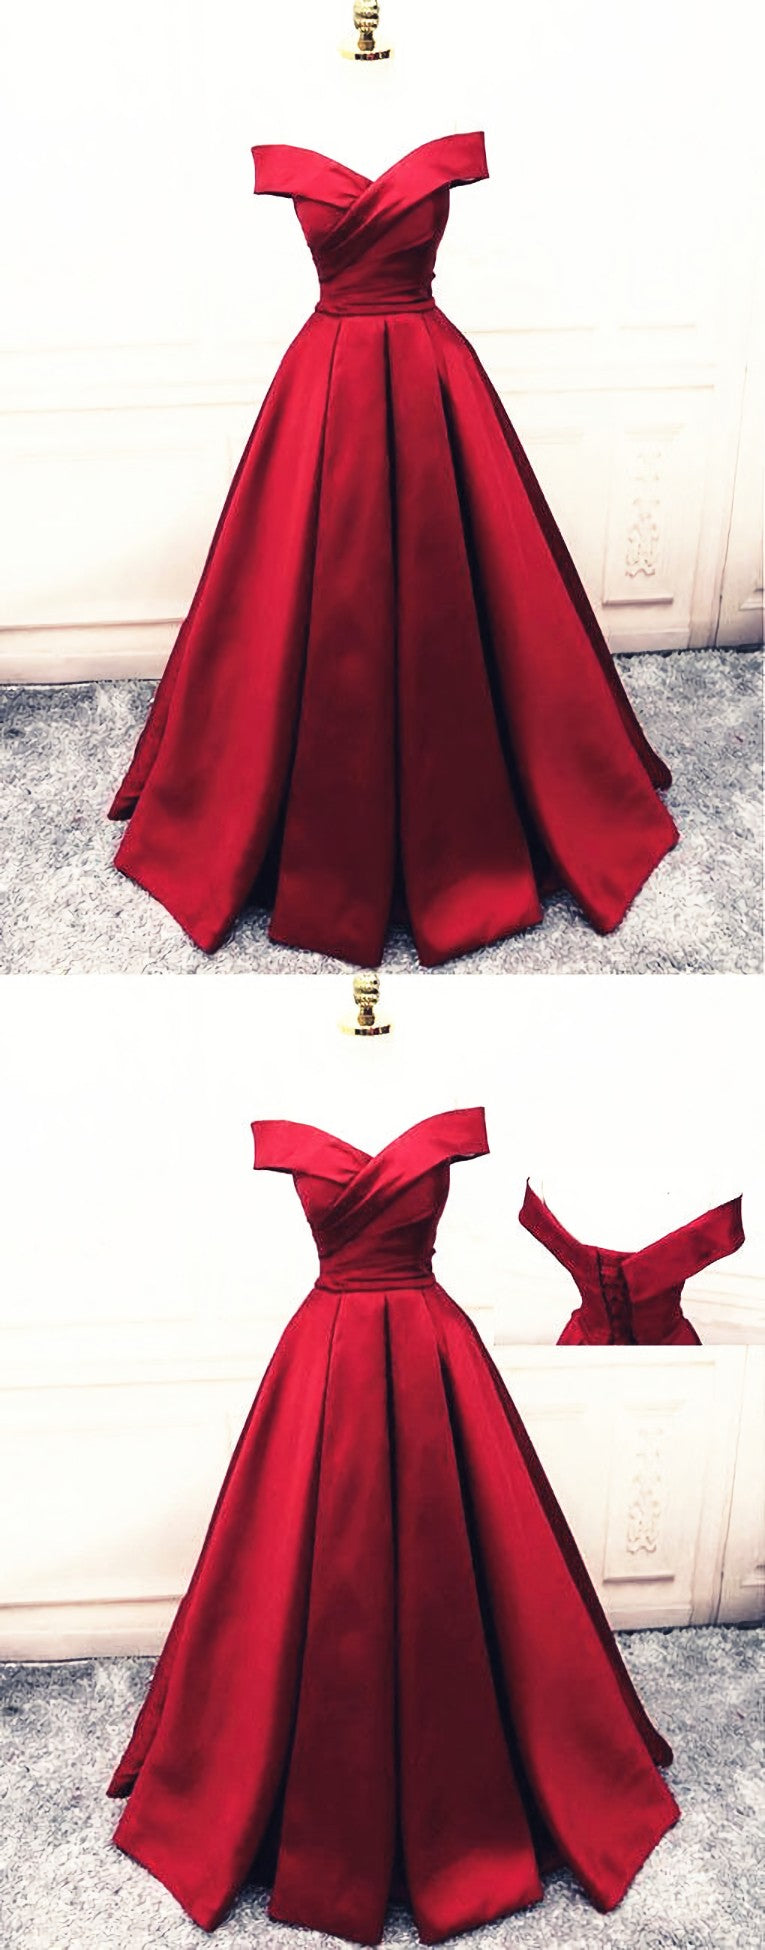 Bridesmaid Dress Sleeveless, Fashionable Dark Red Satin Simple Off Shoulder Prom Dress, Red Party Dress Evening Dress